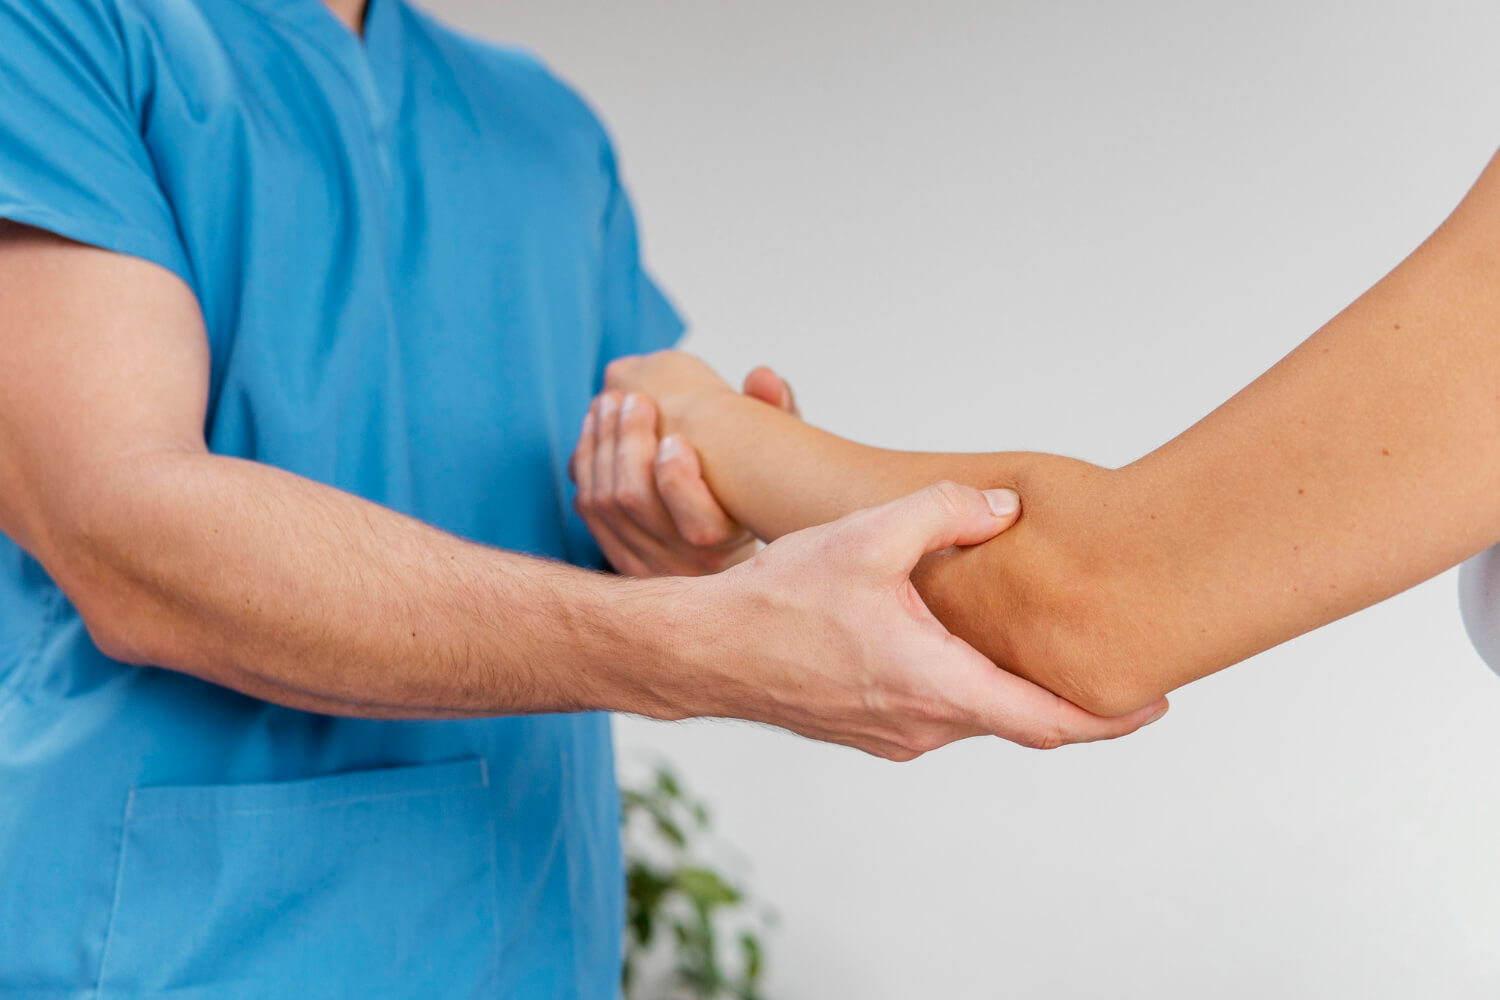 Why Choose Revitalize for Elbow Pain Treatment?